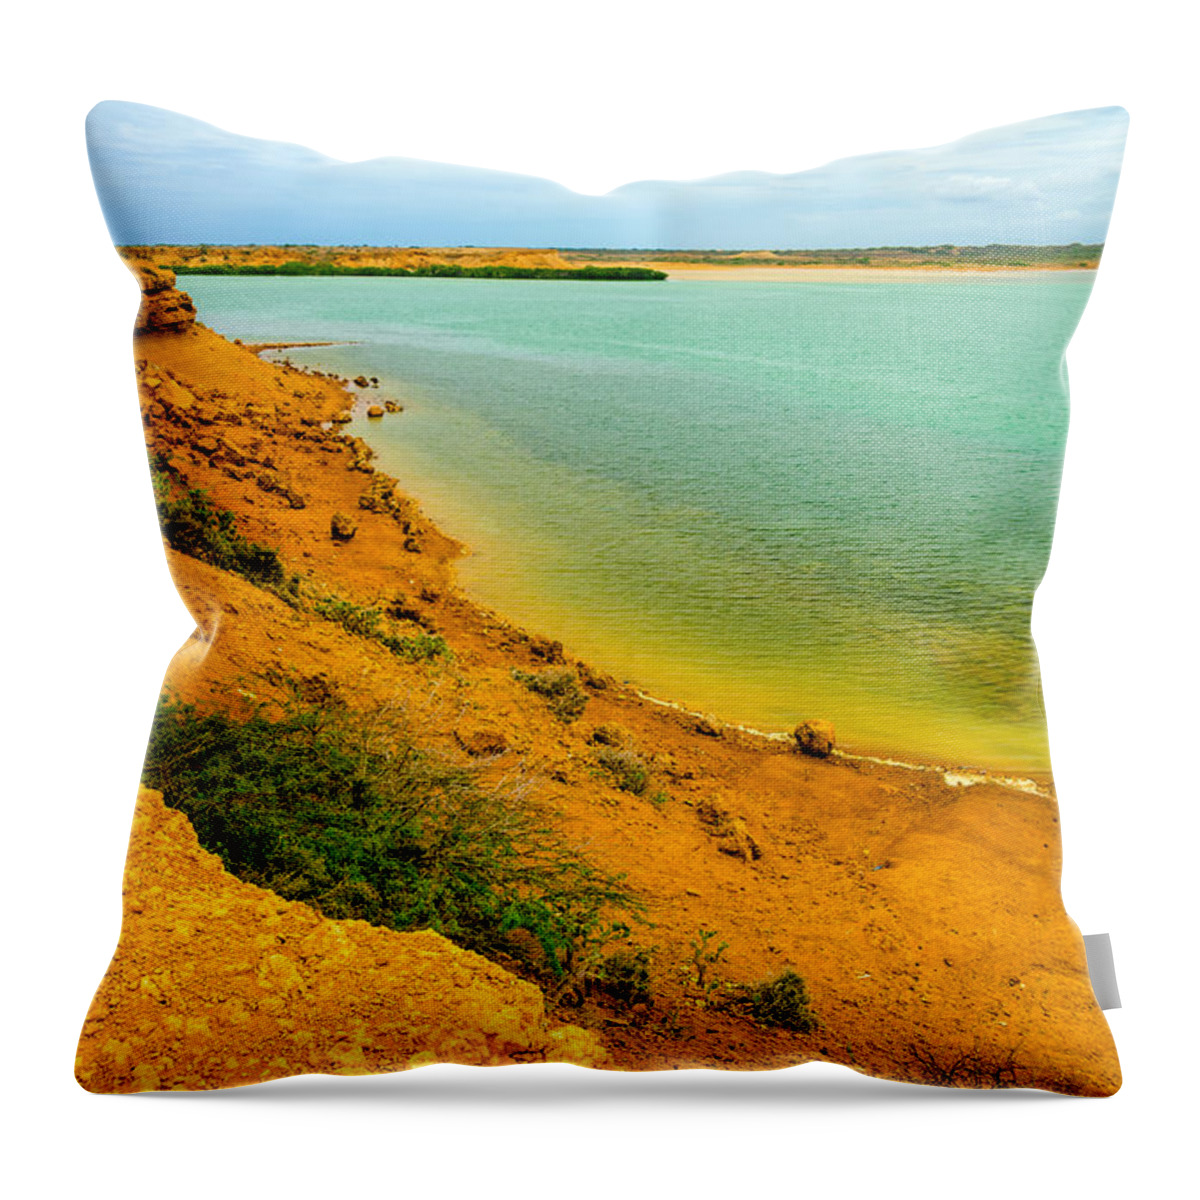 Sky Throw Pillow featuring the photograph Punta Gallinas View by Jess Kraft